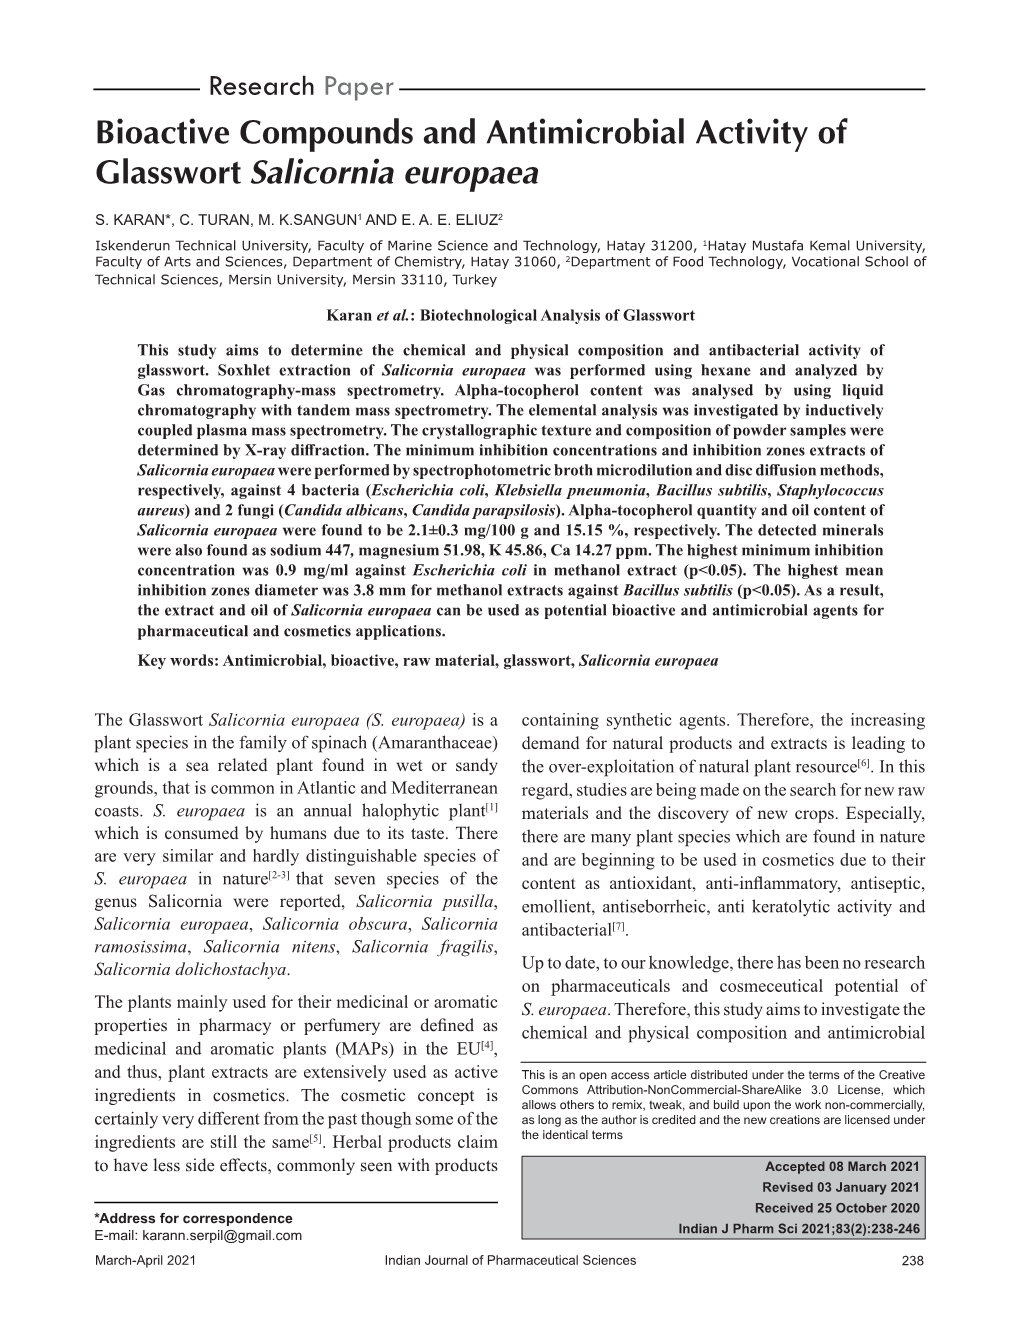 Bioactive Compounds and Antimicrobial Activity of Glasswort Salicornia Europaea